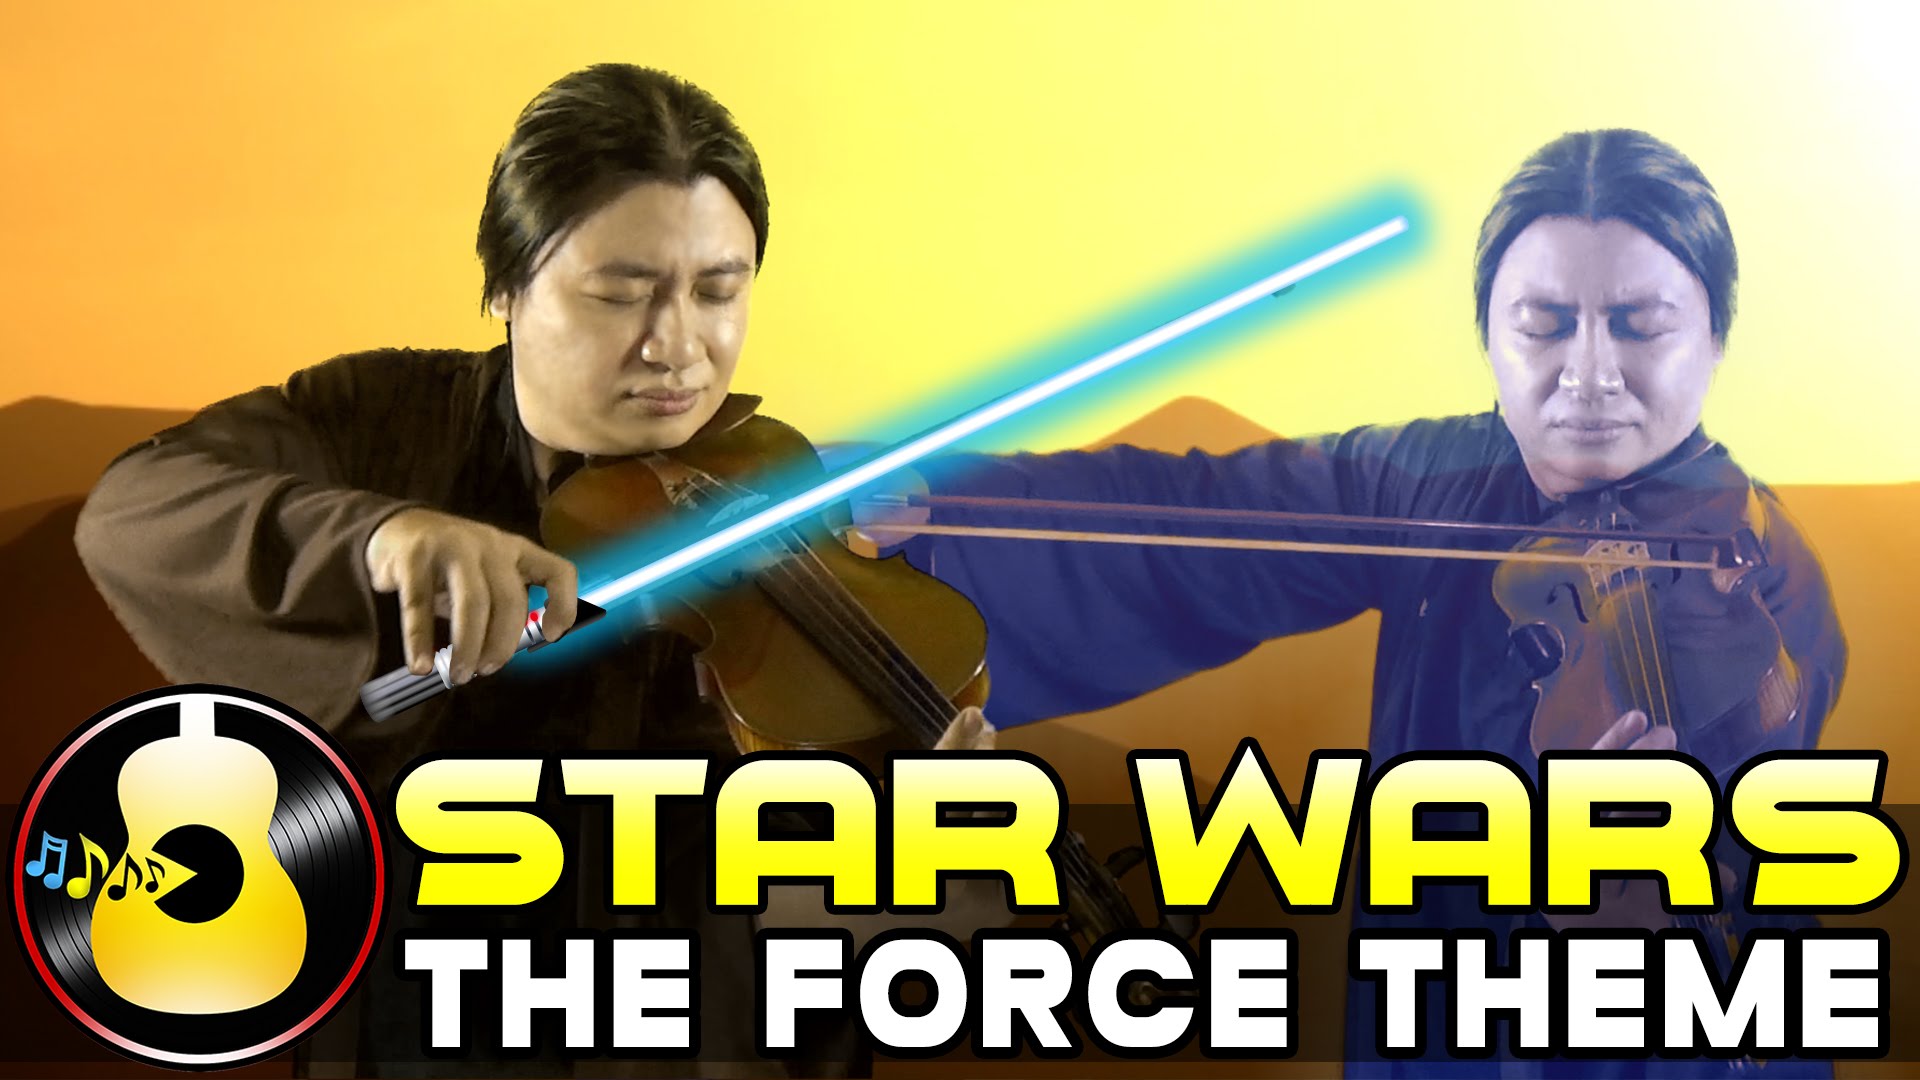 Video of the Day: ‘Star Wars: A New Hope’ Force Theme